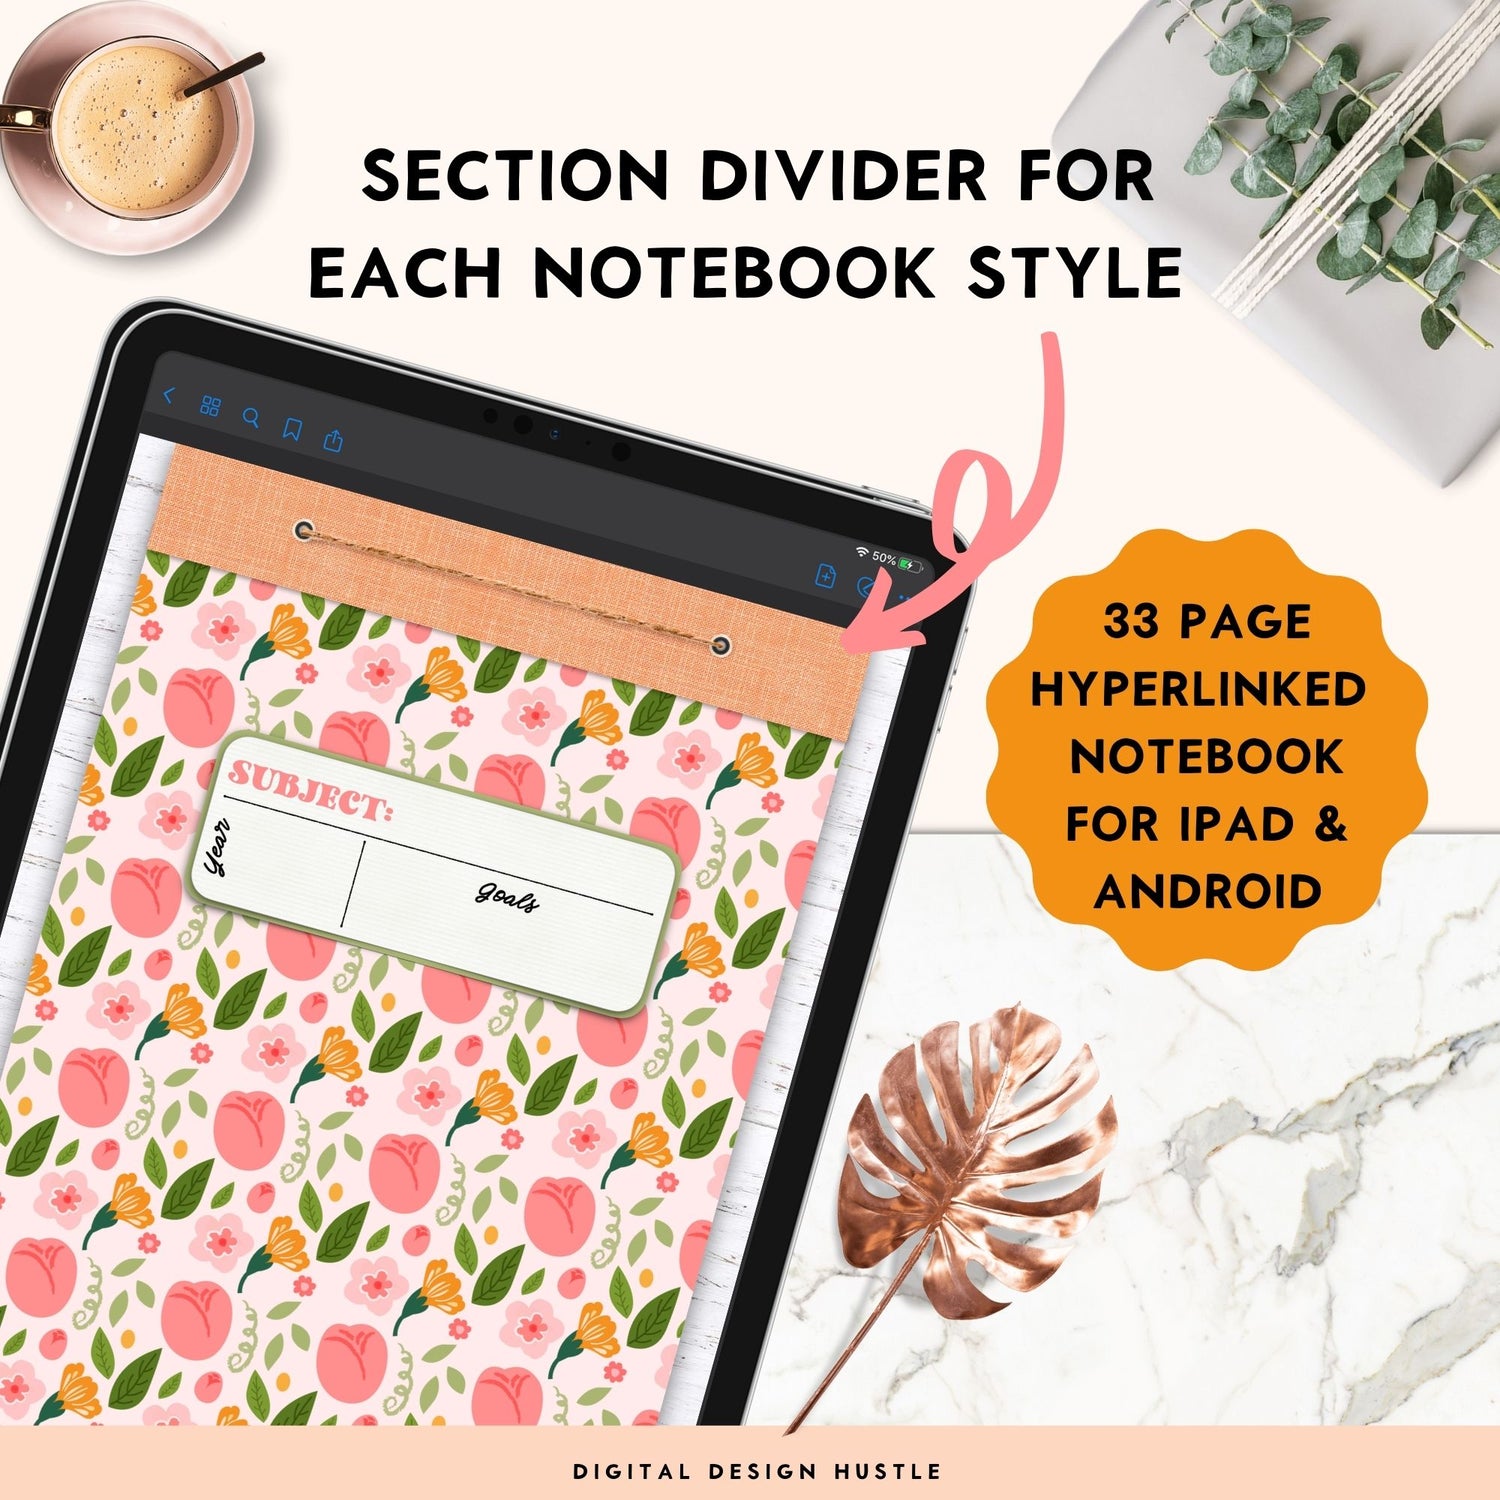 Digital Notebook With 5 Hyperlinked Sections